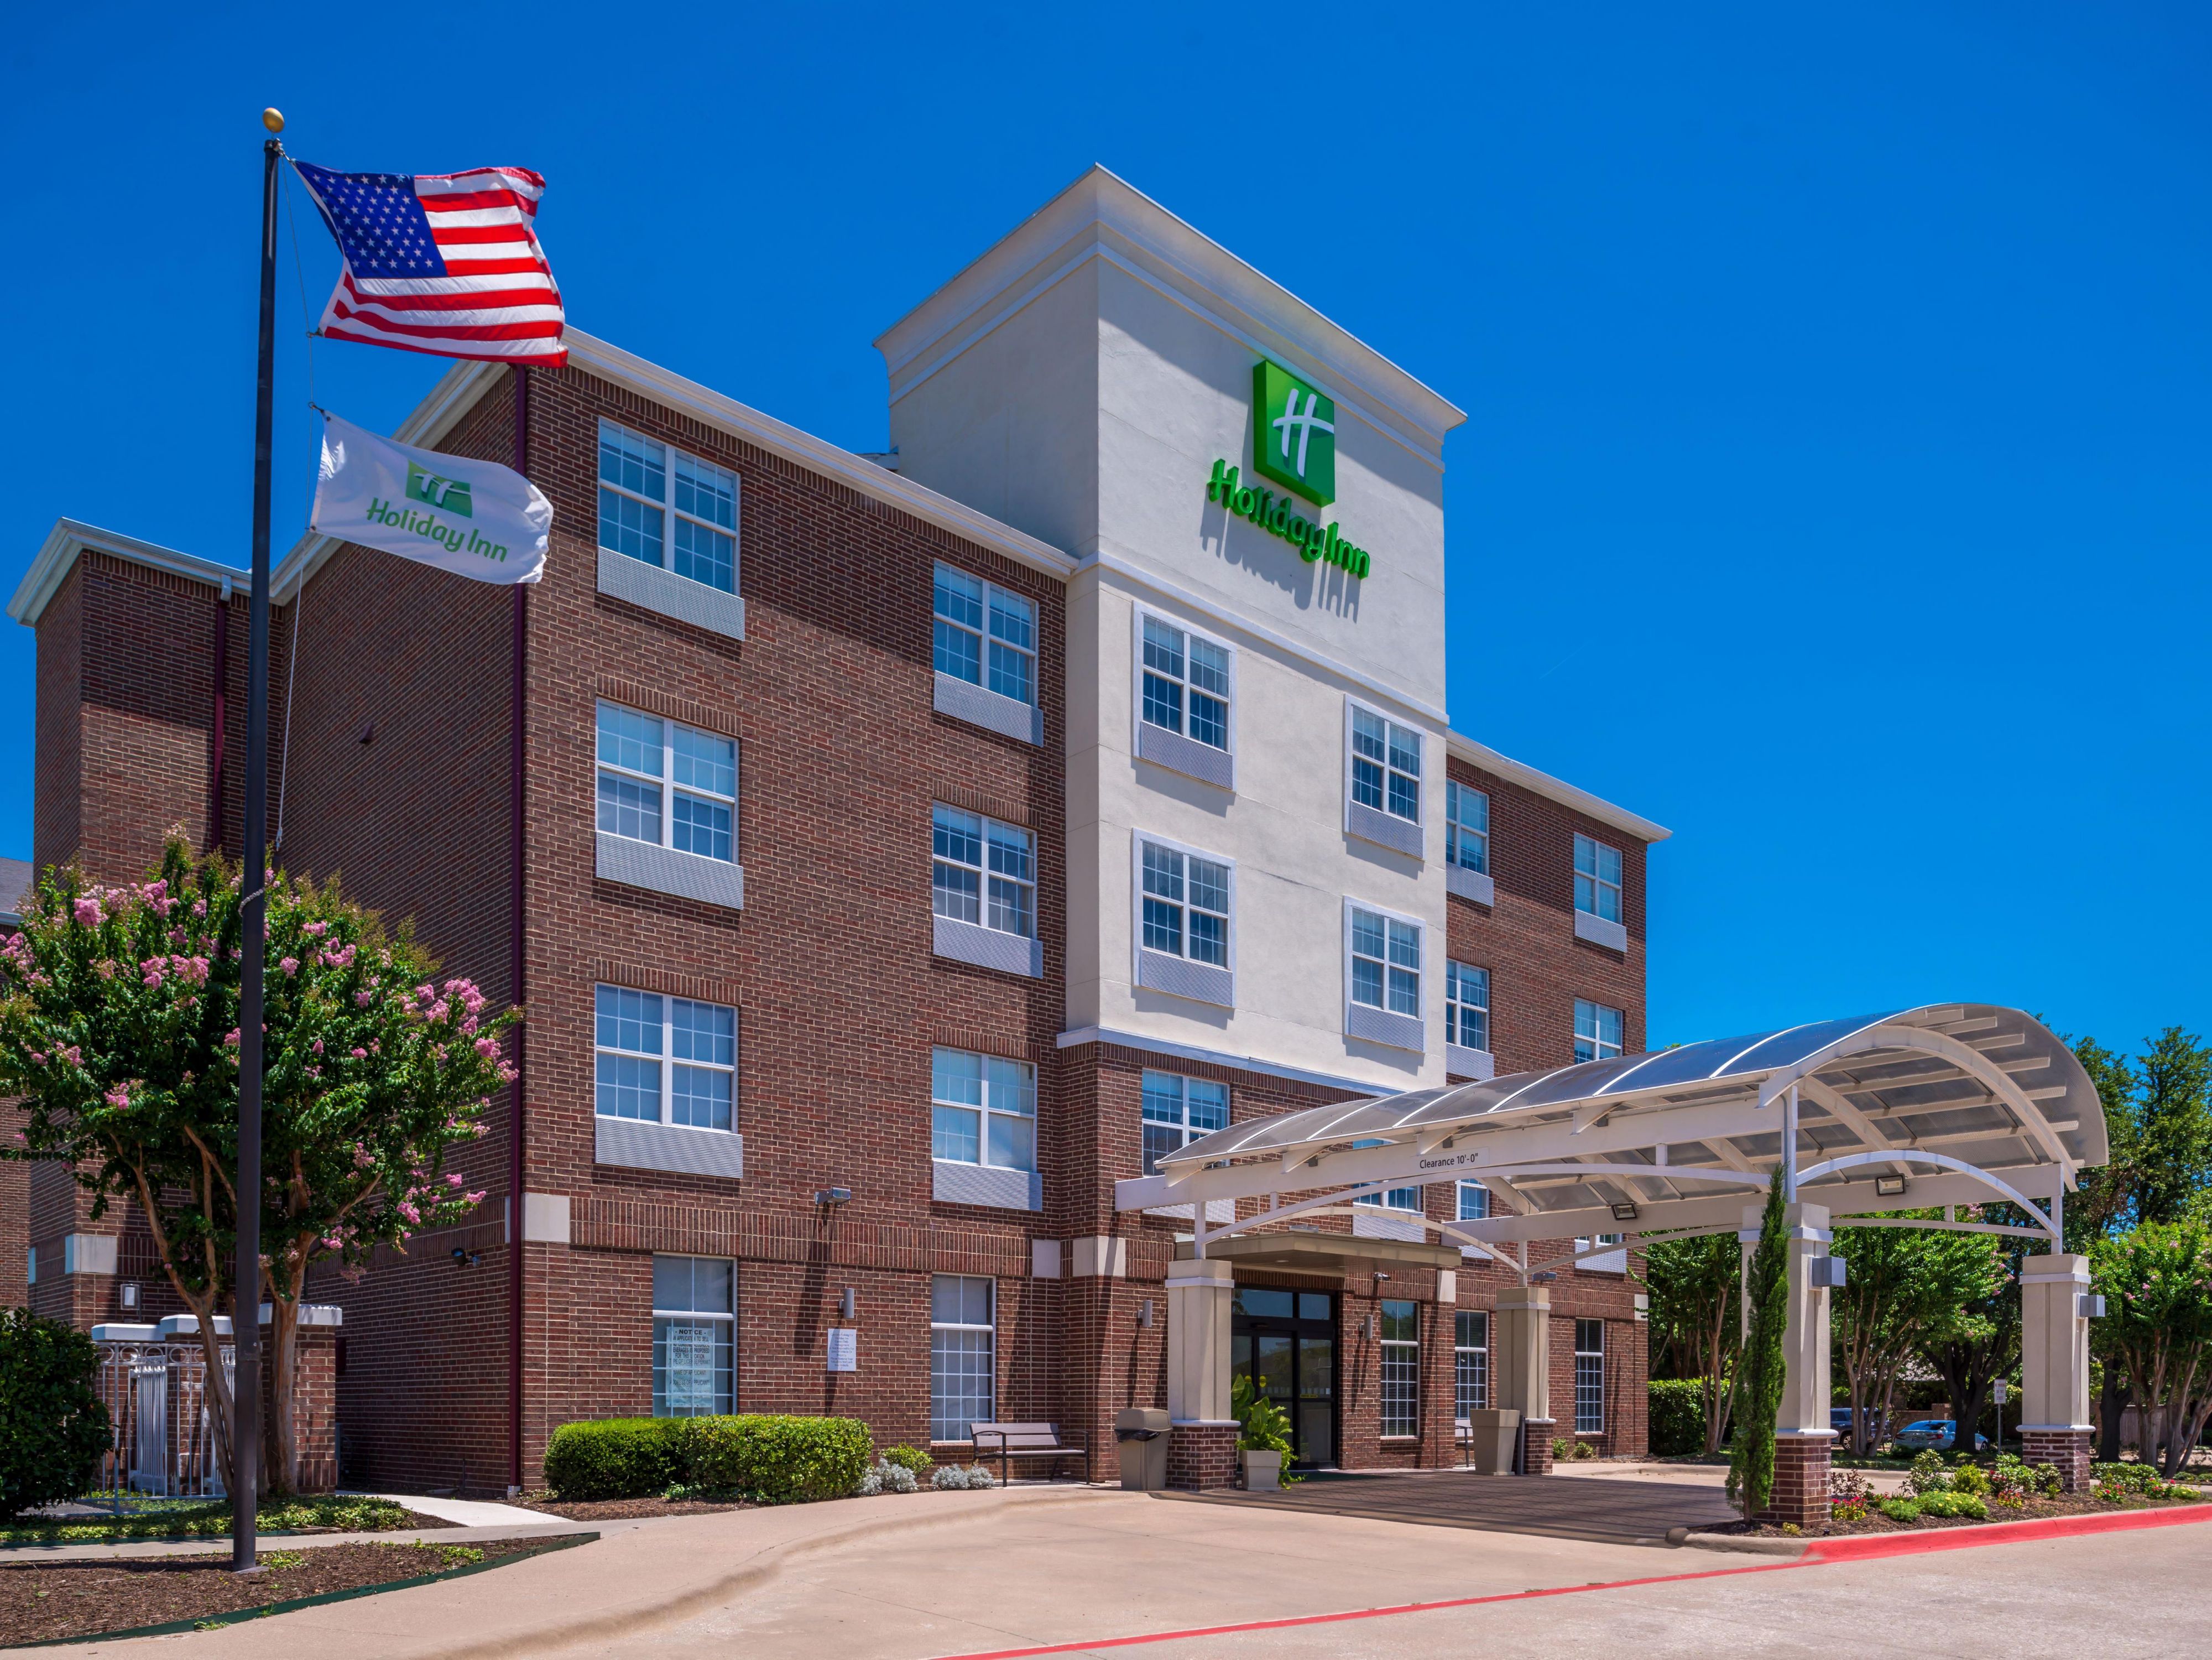 Candlewood Suites Frisco Extended Stay Hotels - 